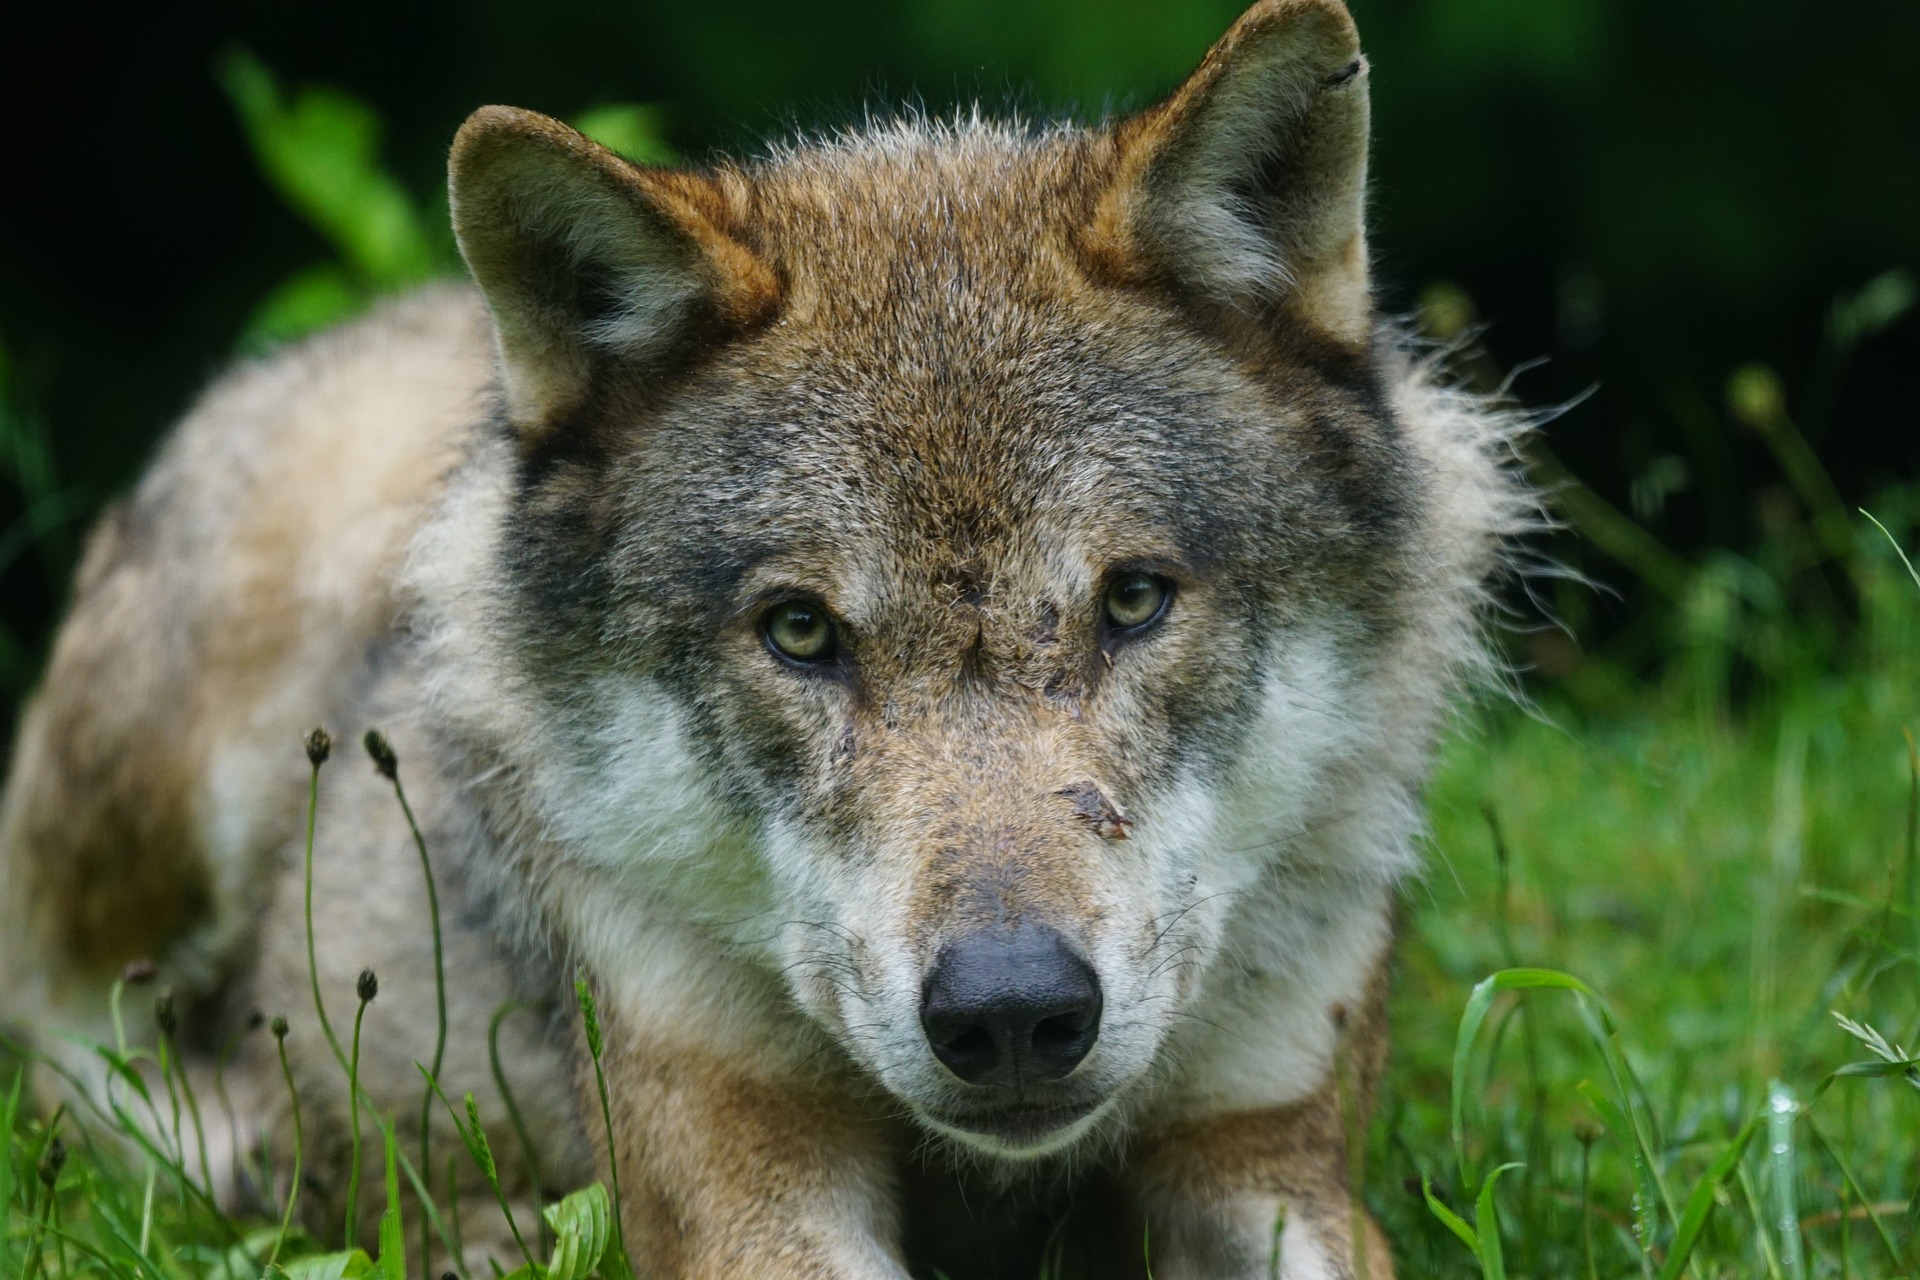 A wolf seen from upclose laying in a grassy field and looking into the camera